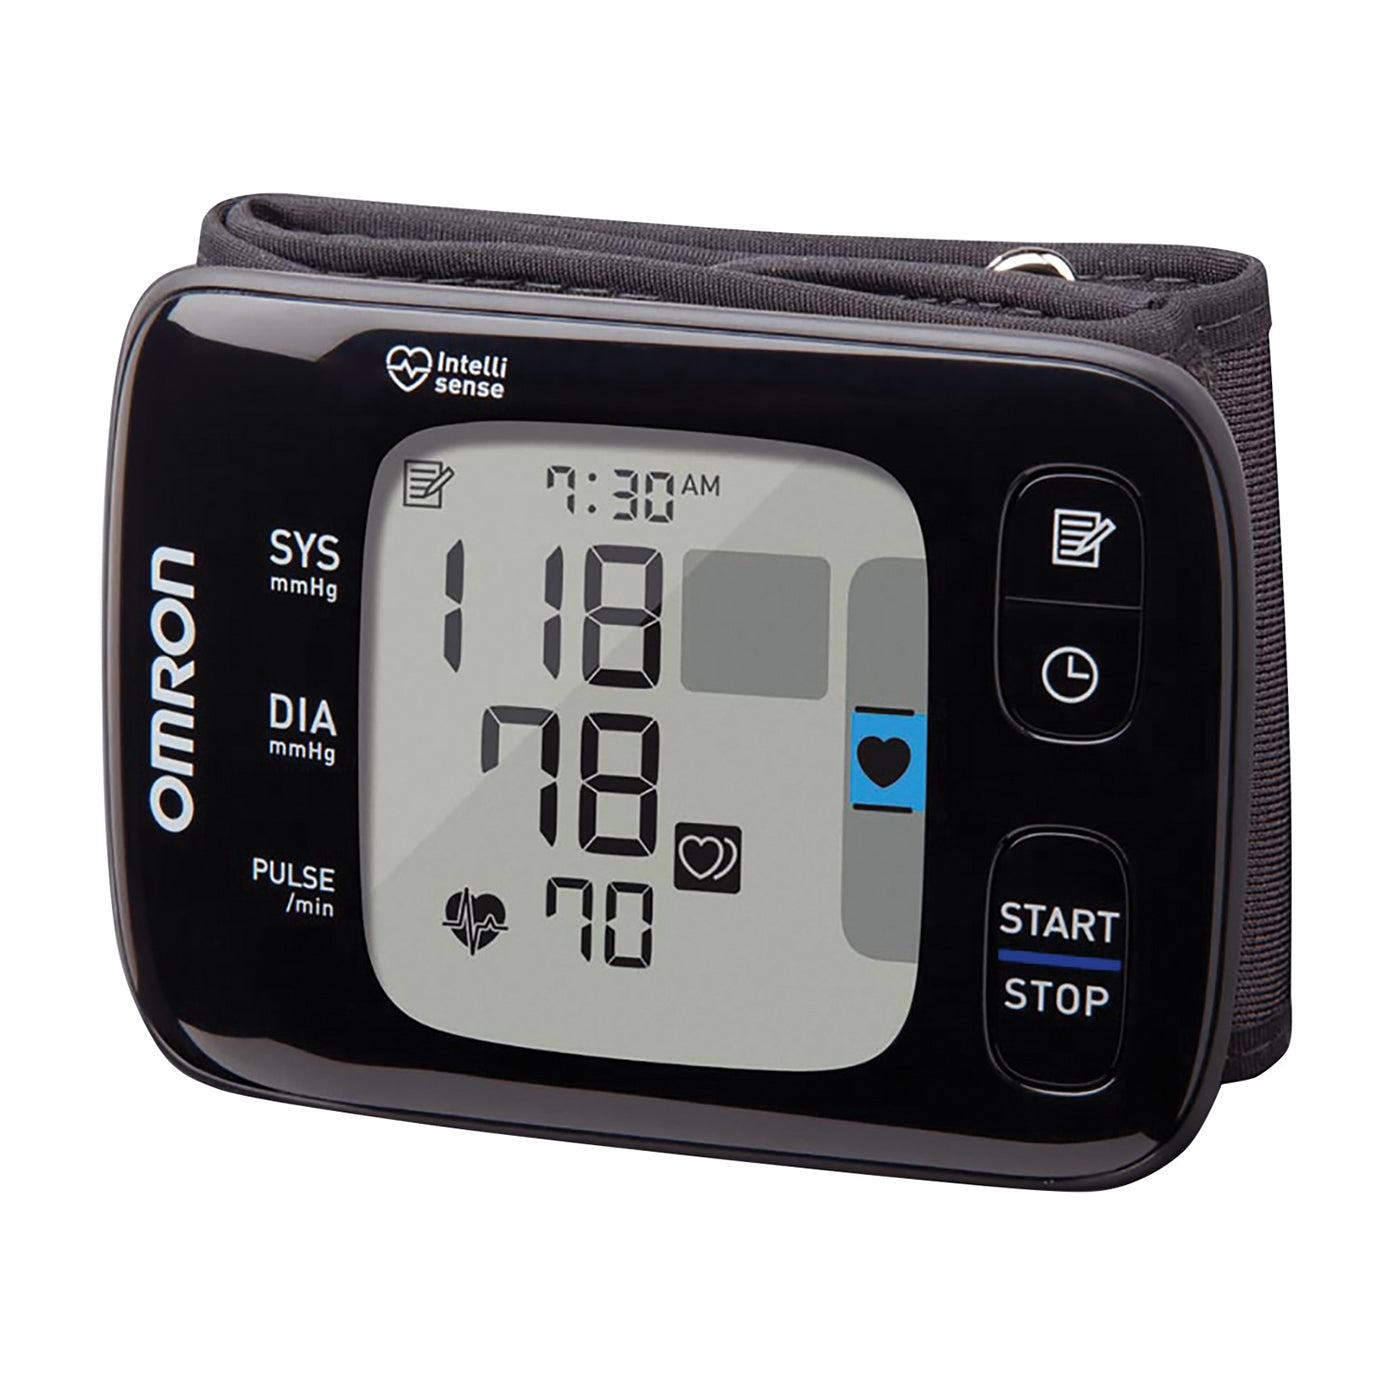 Omron Introduces Smartwatch-Size Blood Pressure Monitor